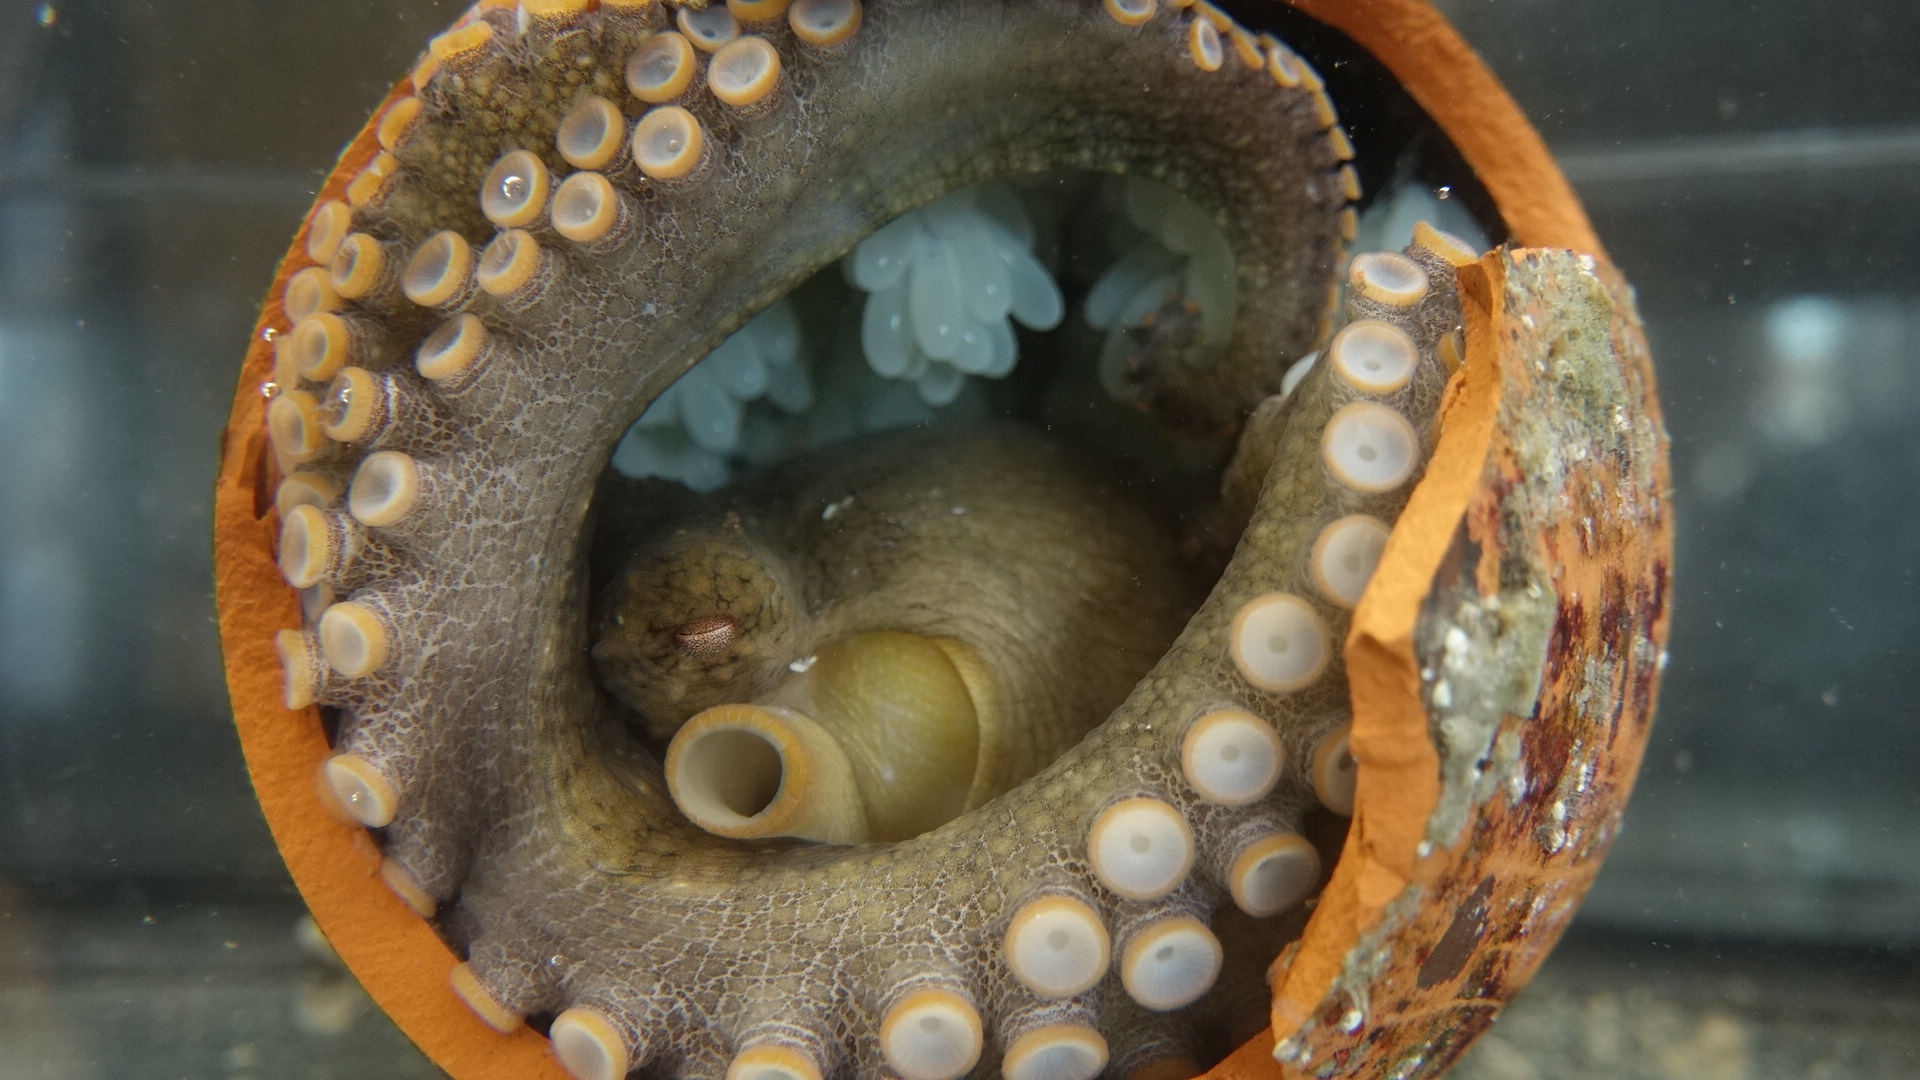 The California two-spotted octopus (Octopus bimaculoides) has circular blue eye circles on both sides of its head.